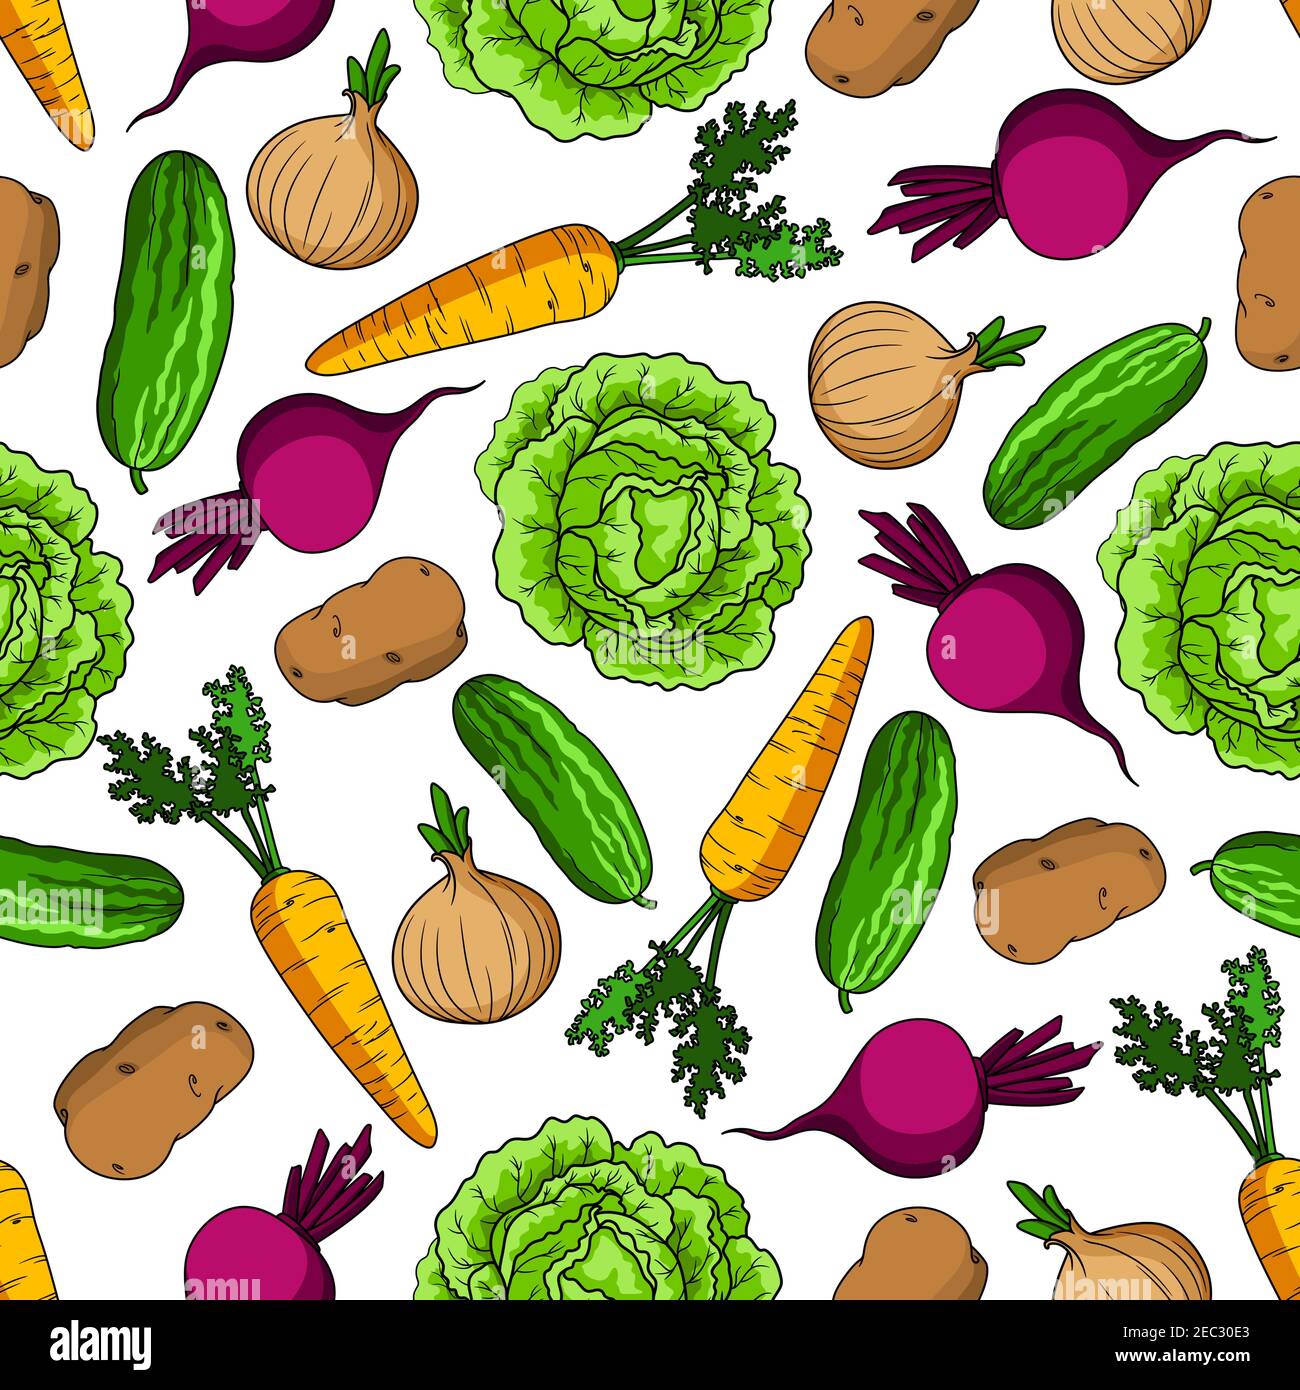 https://c8.alamy.com/comp/2EC30E3/healthy-vegetarian-pattern-with-seamless-cartoon-ornament-of-vivid-green-cabbages-and-cucumbers-juicy-orange-carrots-and-onions-with-fresh-leaves-pu-2EC30E3.jpg